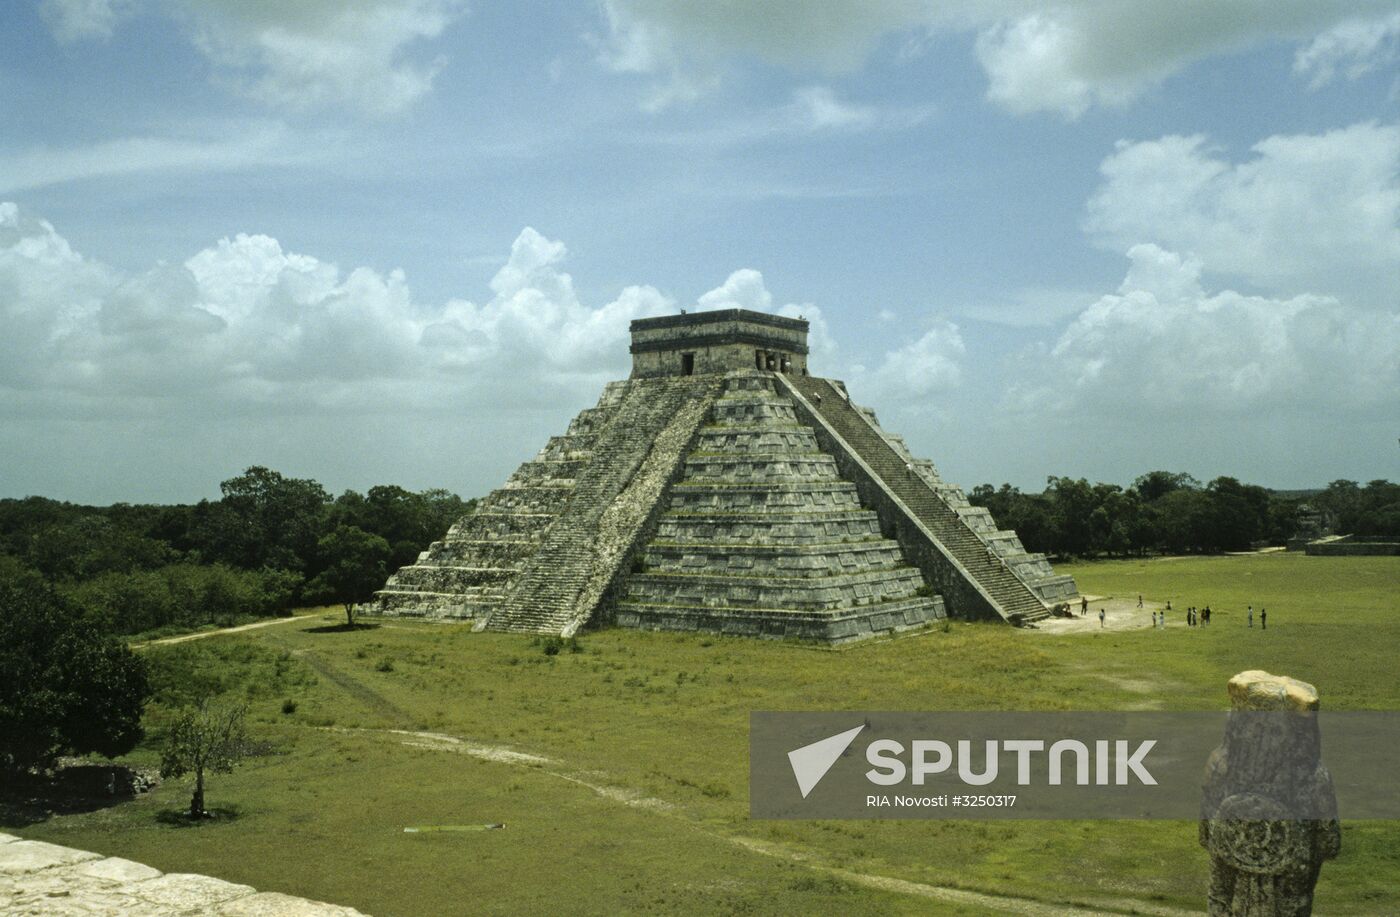 Pyramid of Kukulcan in the ancient Mayan city of Chichen Itza in Mexico